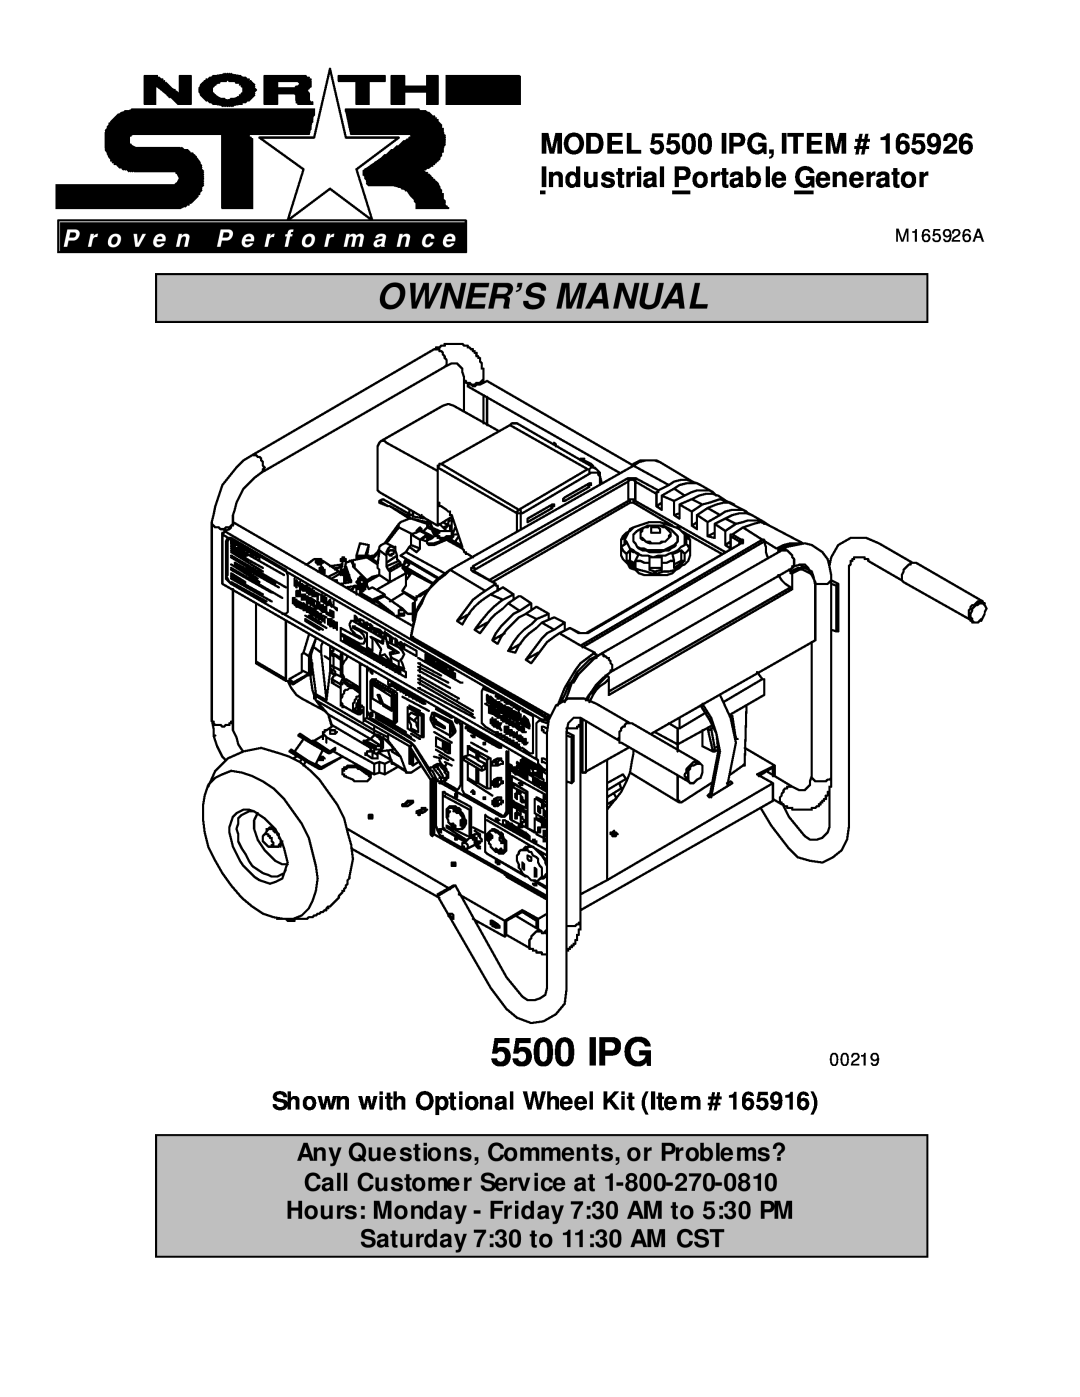 North Star 5500 IPG owner manual Shown with Optional Wheel Kit Item #, P r o v e n P e r f o r m a n c e 